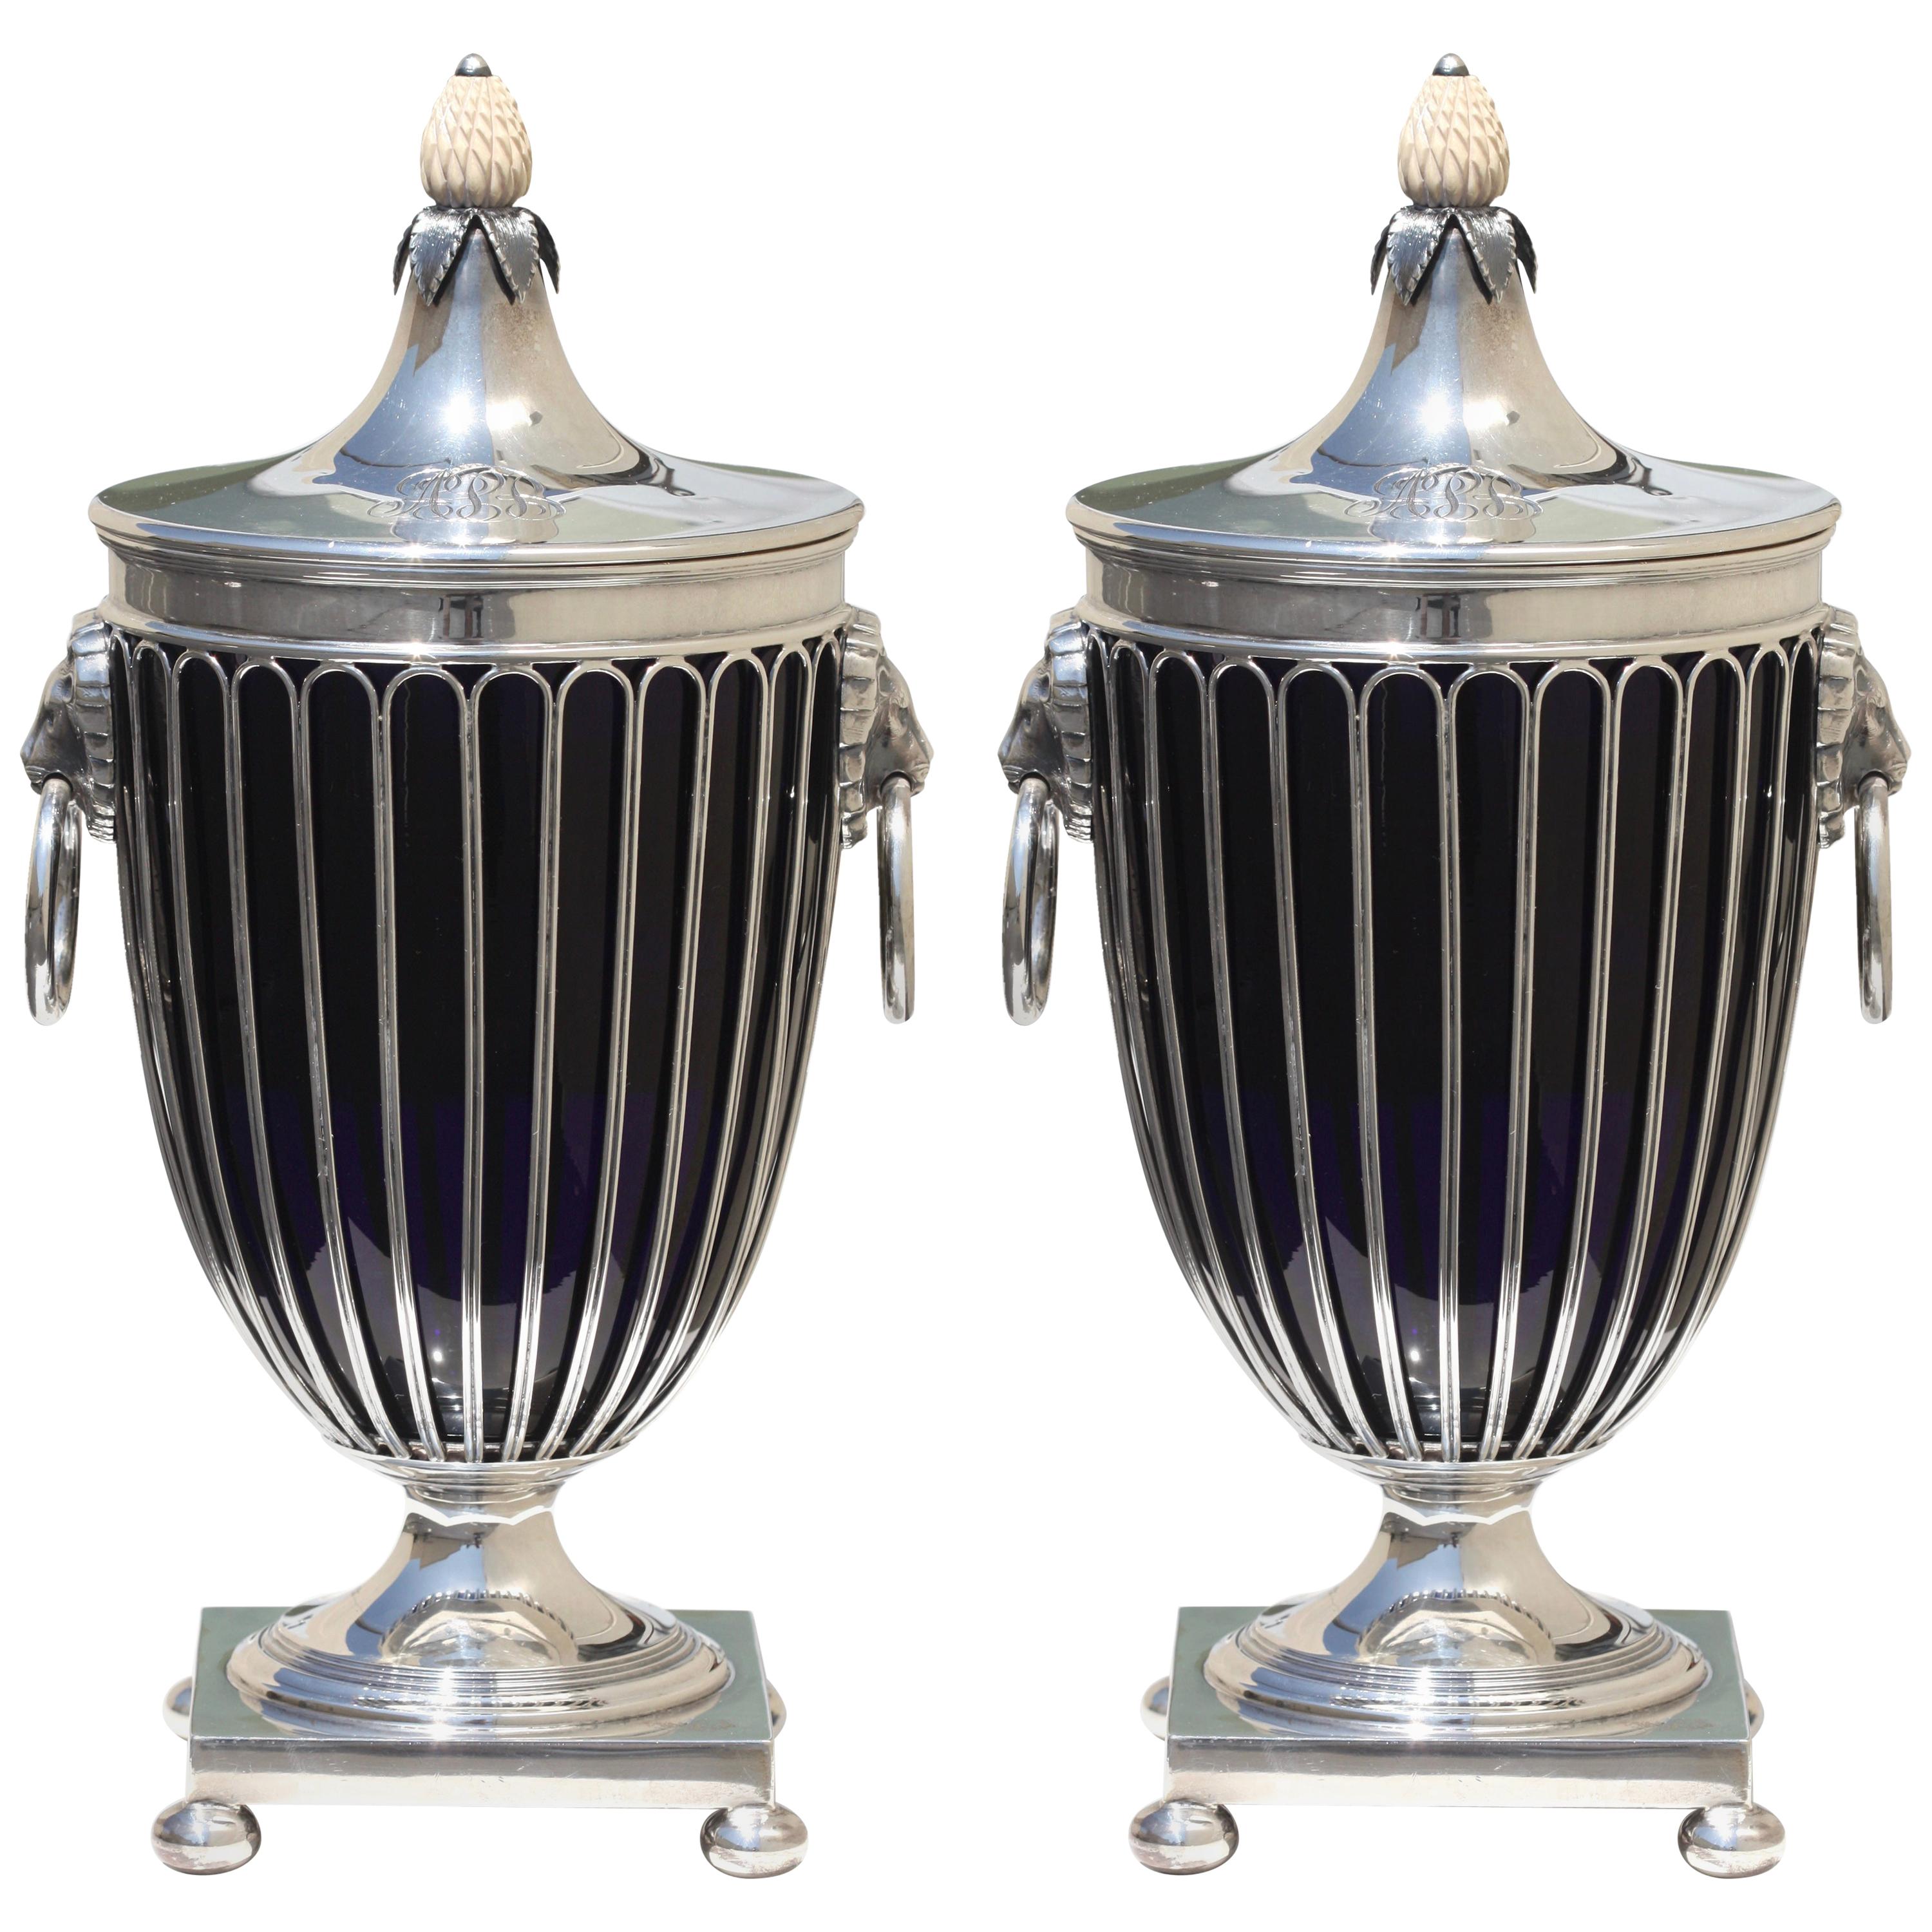 Pair of English Silver Vases and Covers